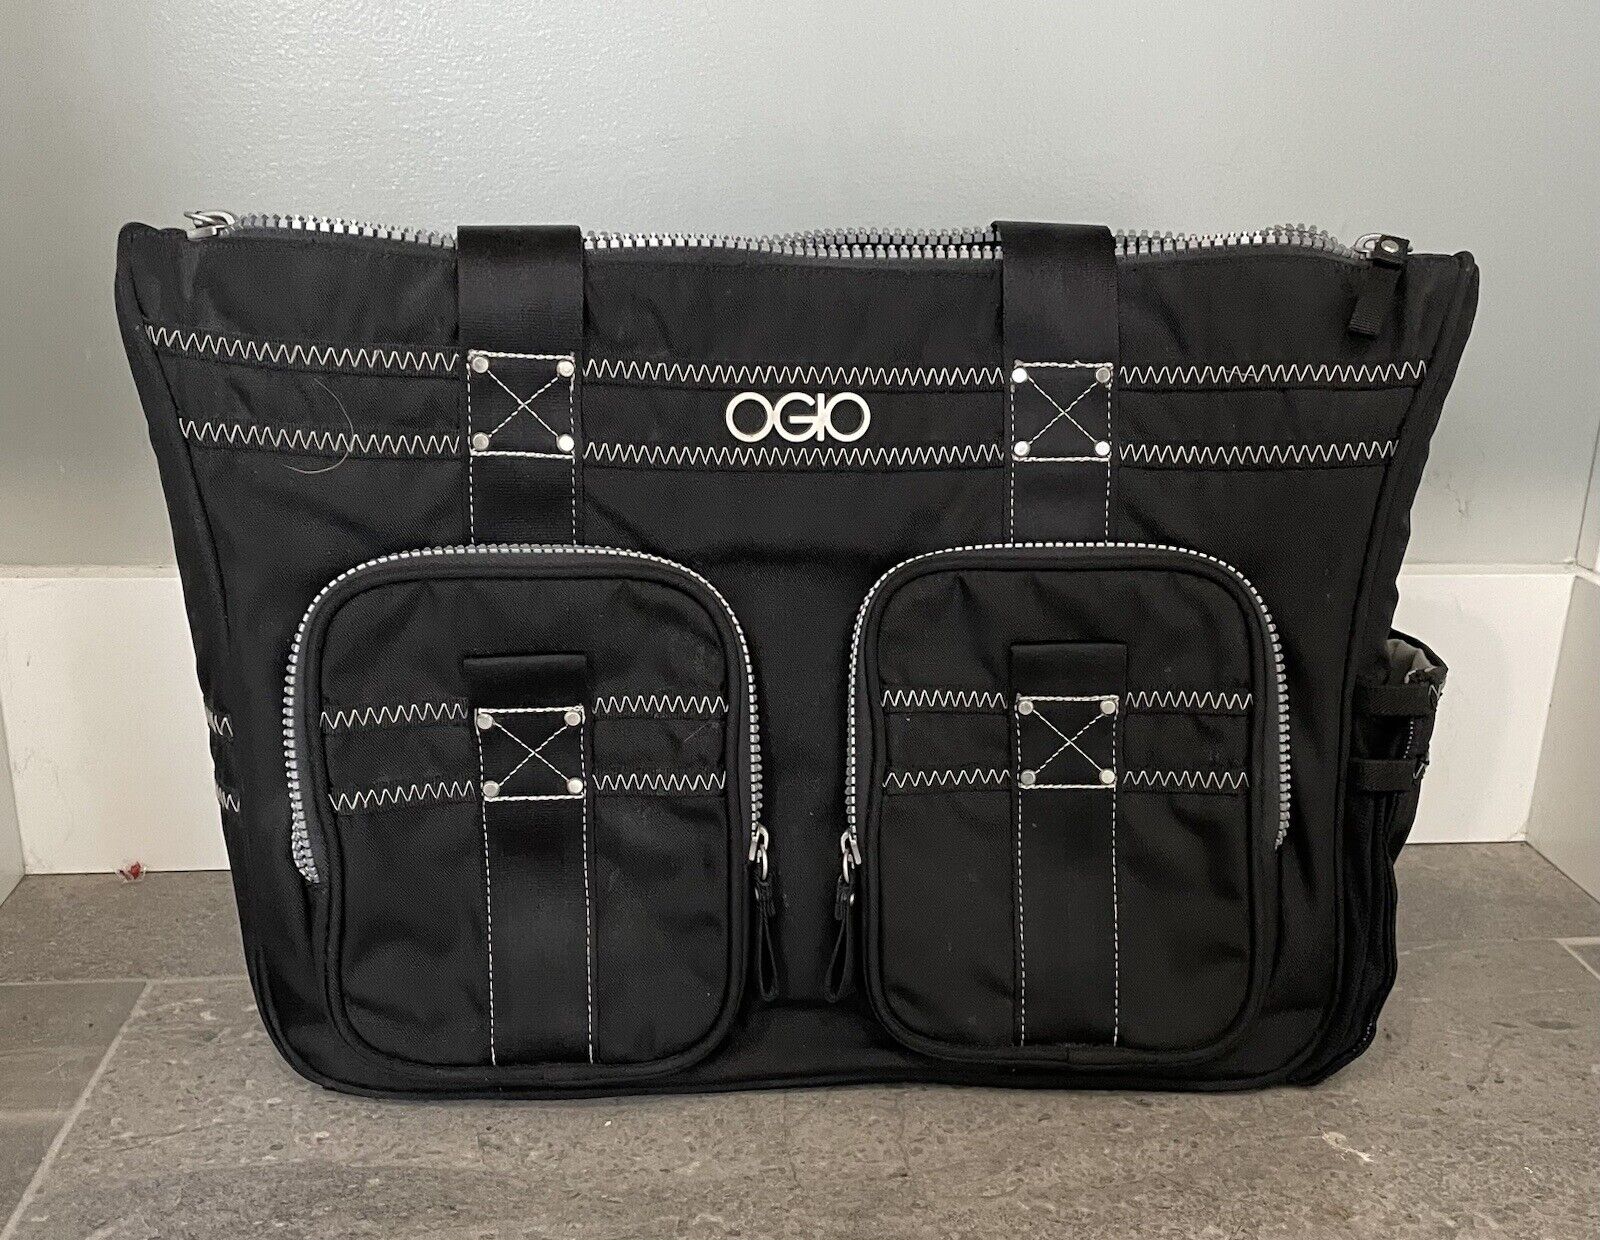 Ogio Briefcase/Laptop Bag. Black Canvas w/White Stiching.Only used a few times.